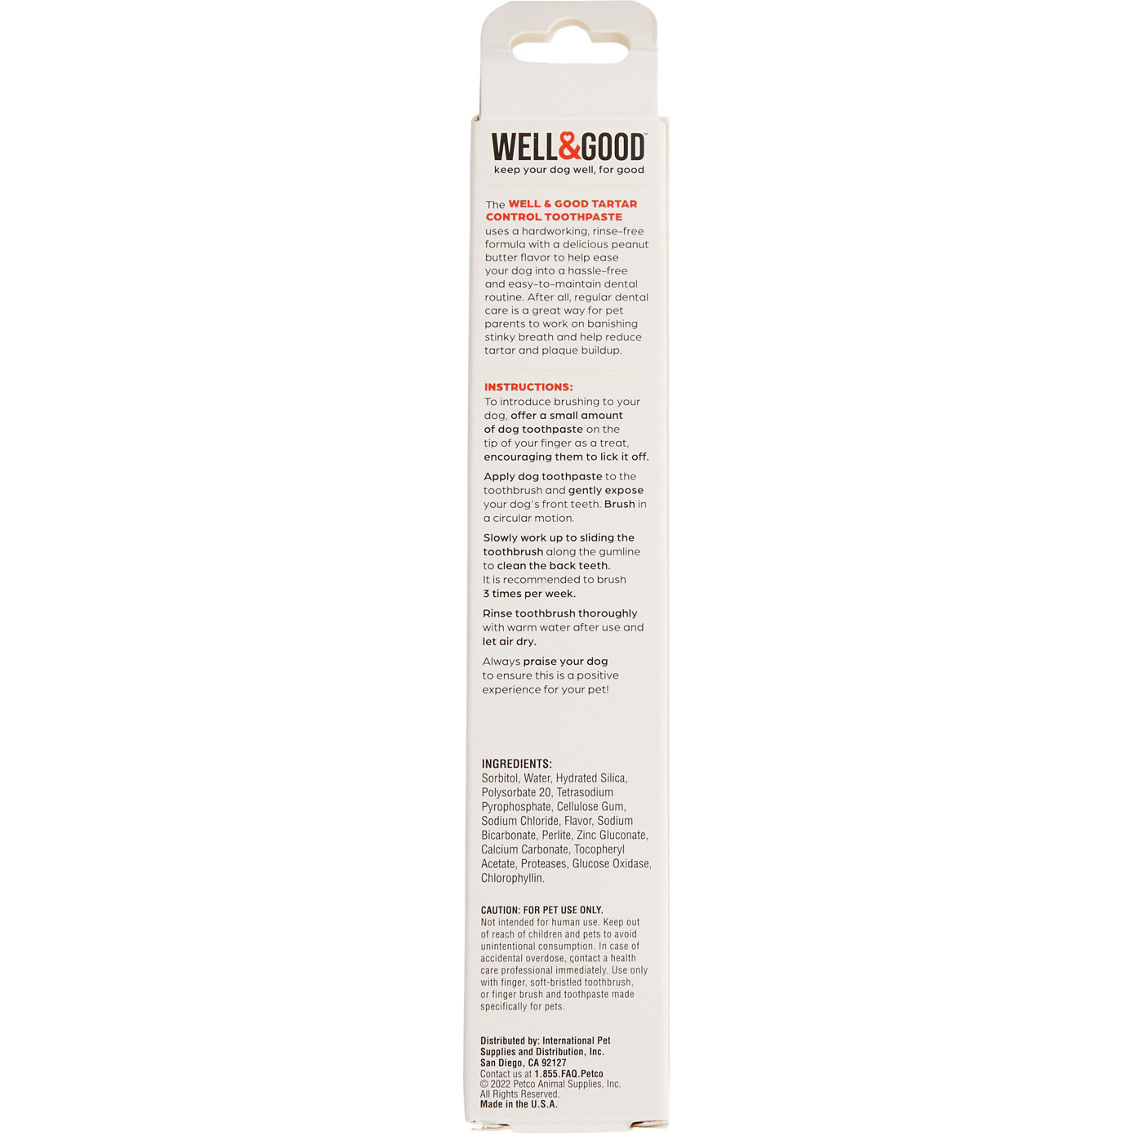 Well & Good Tartar Control Peanut Butter Toothpaste for Dogs 3.25 oz. - Image 2 of 3